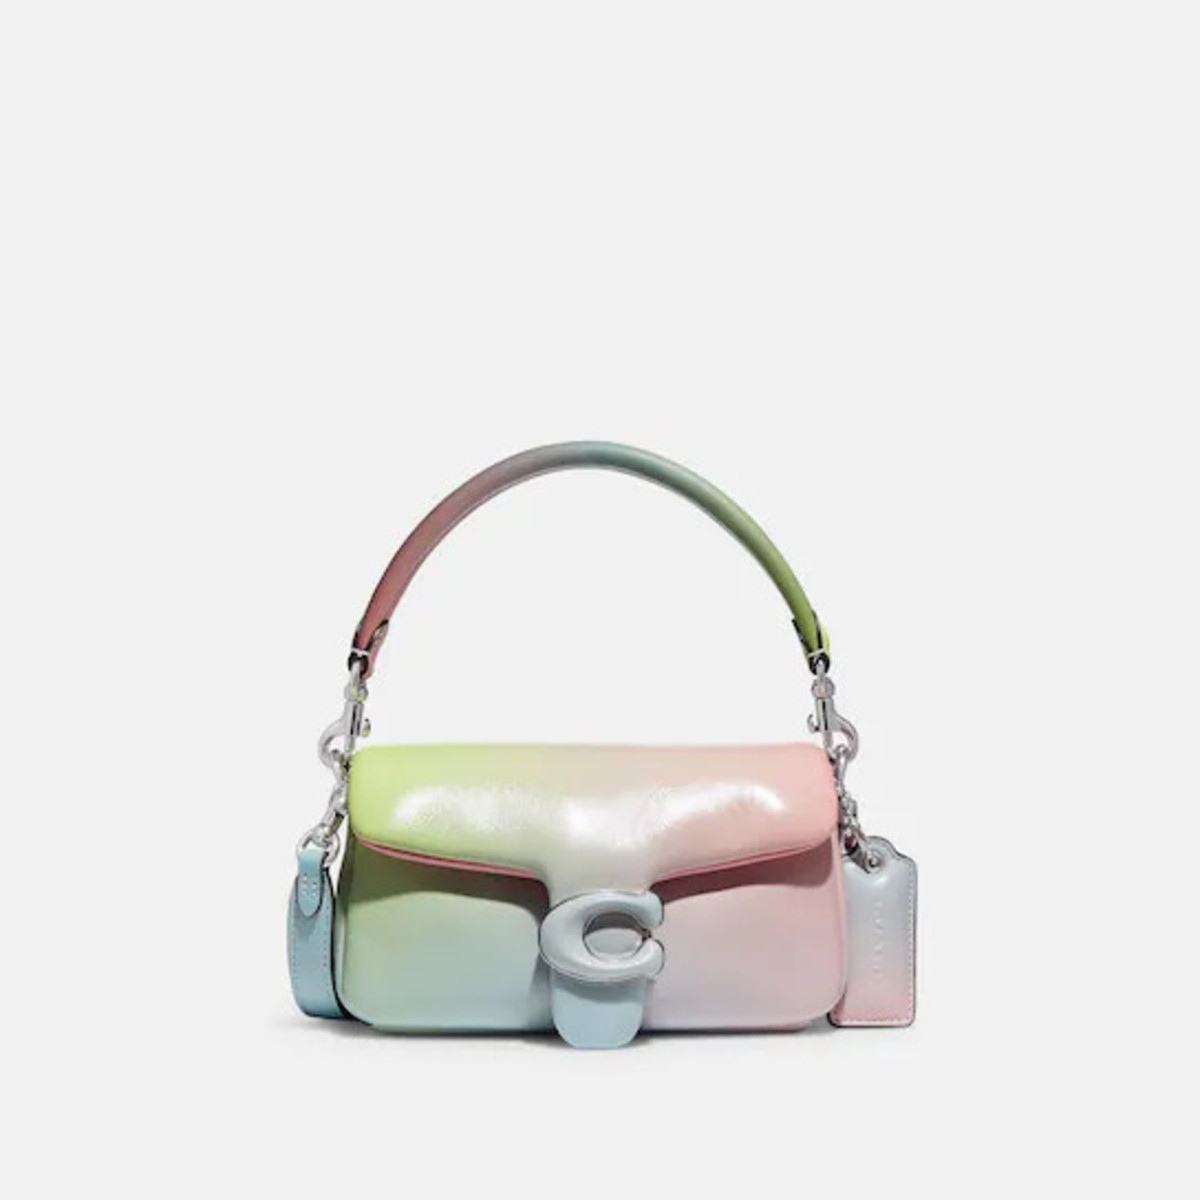 This Joy-Inducing Coach Bag Lives Up to the Hype - Fashionista